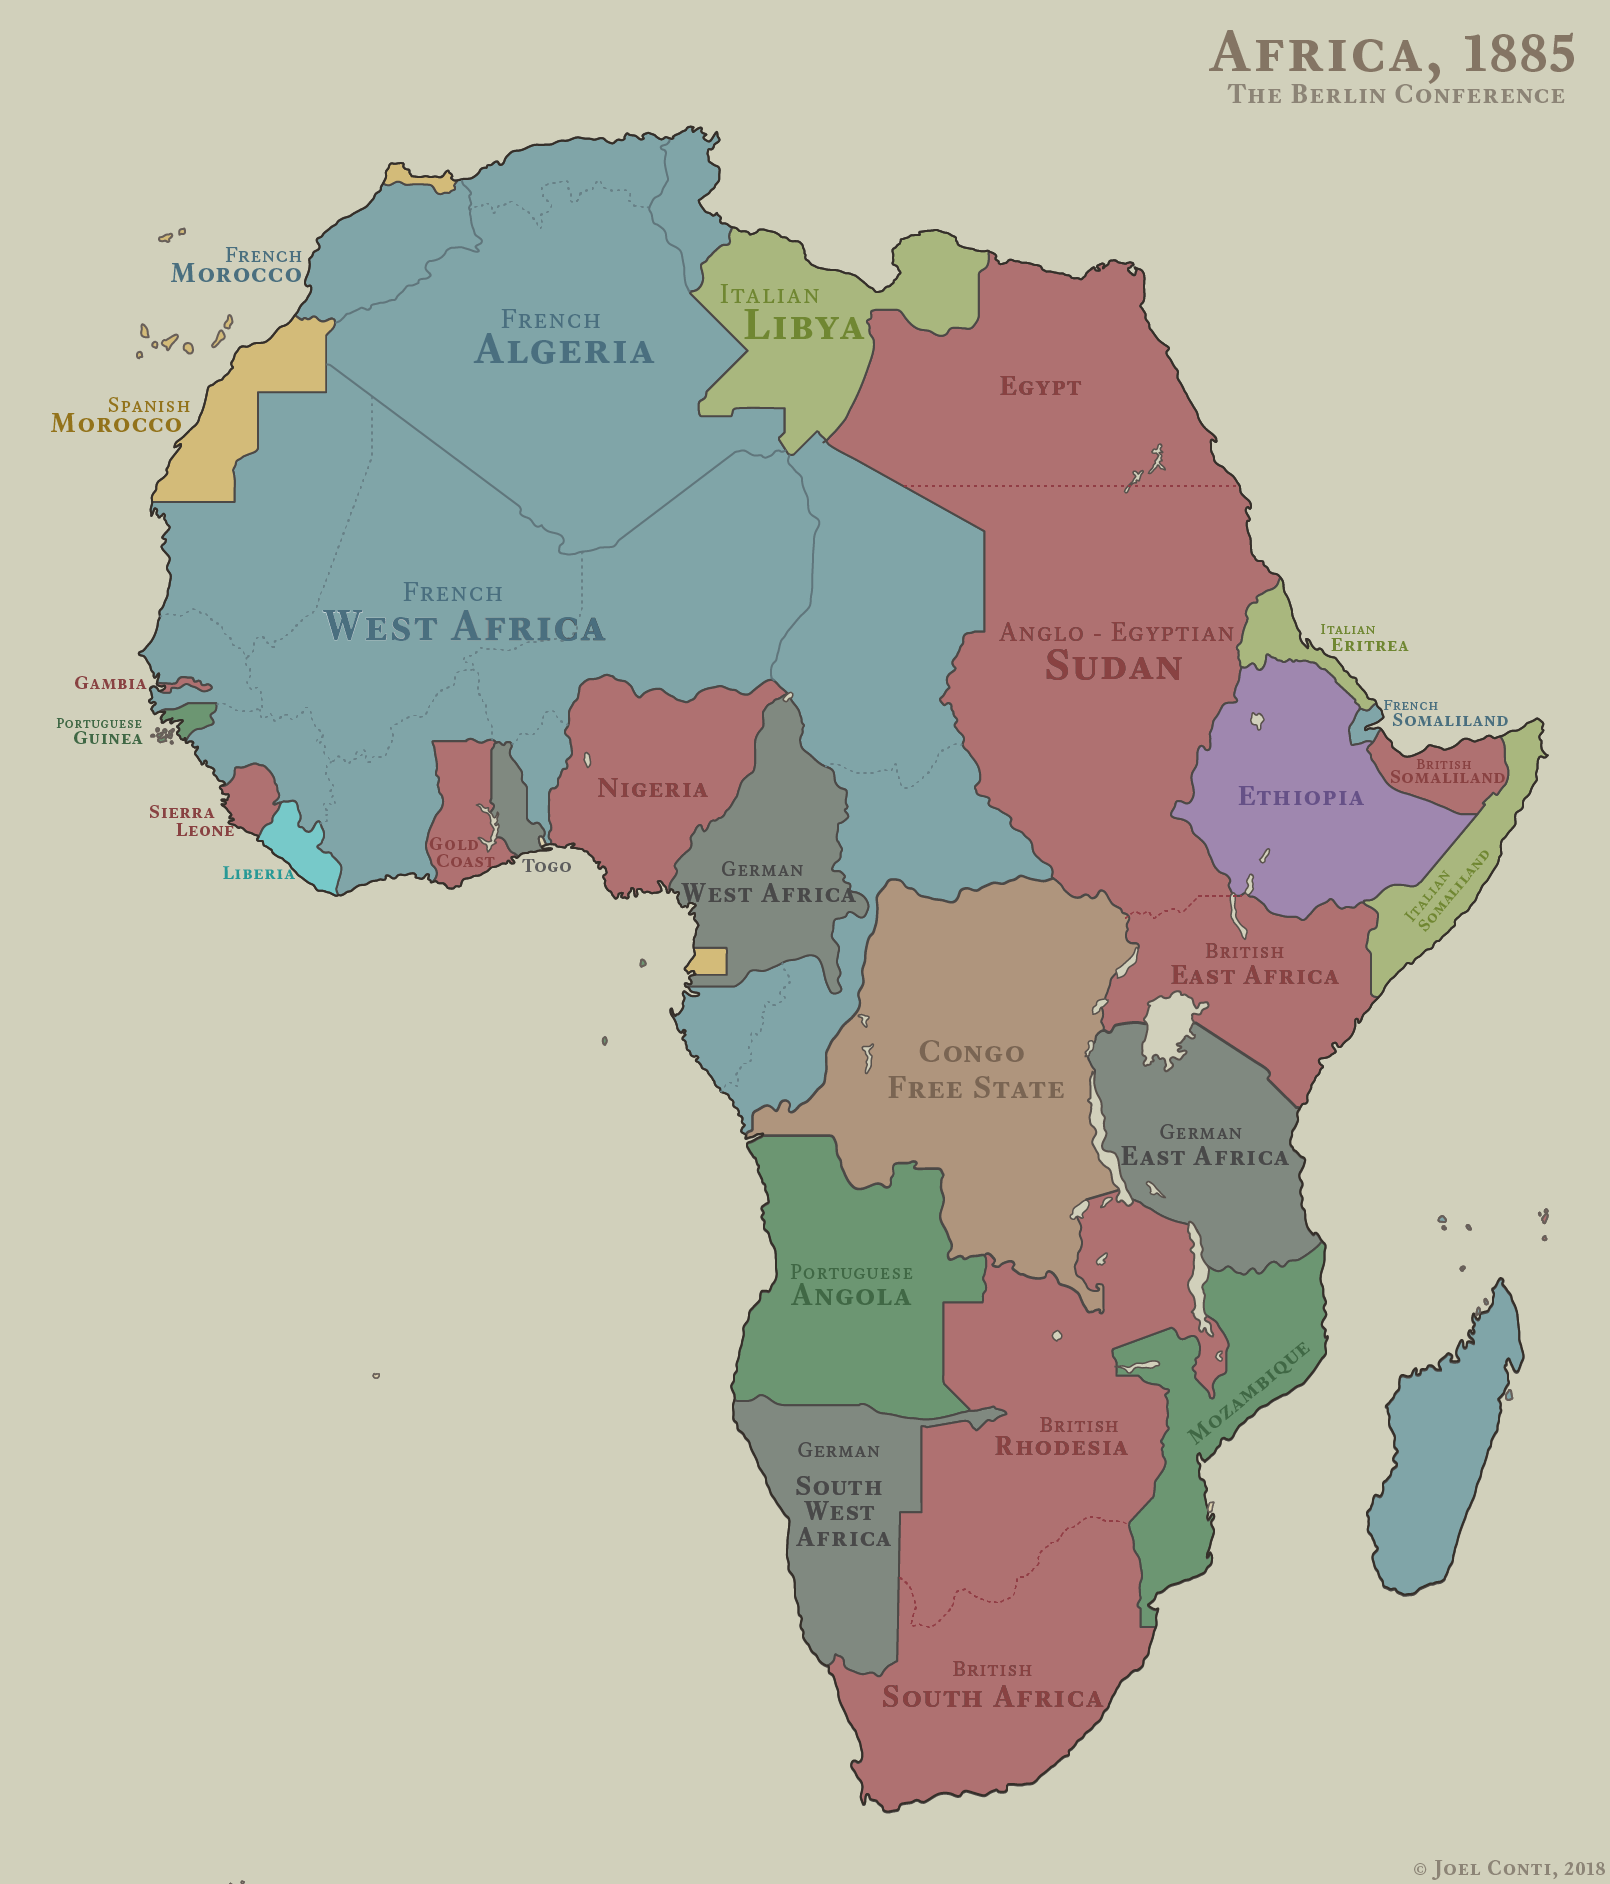 Africa1885.png